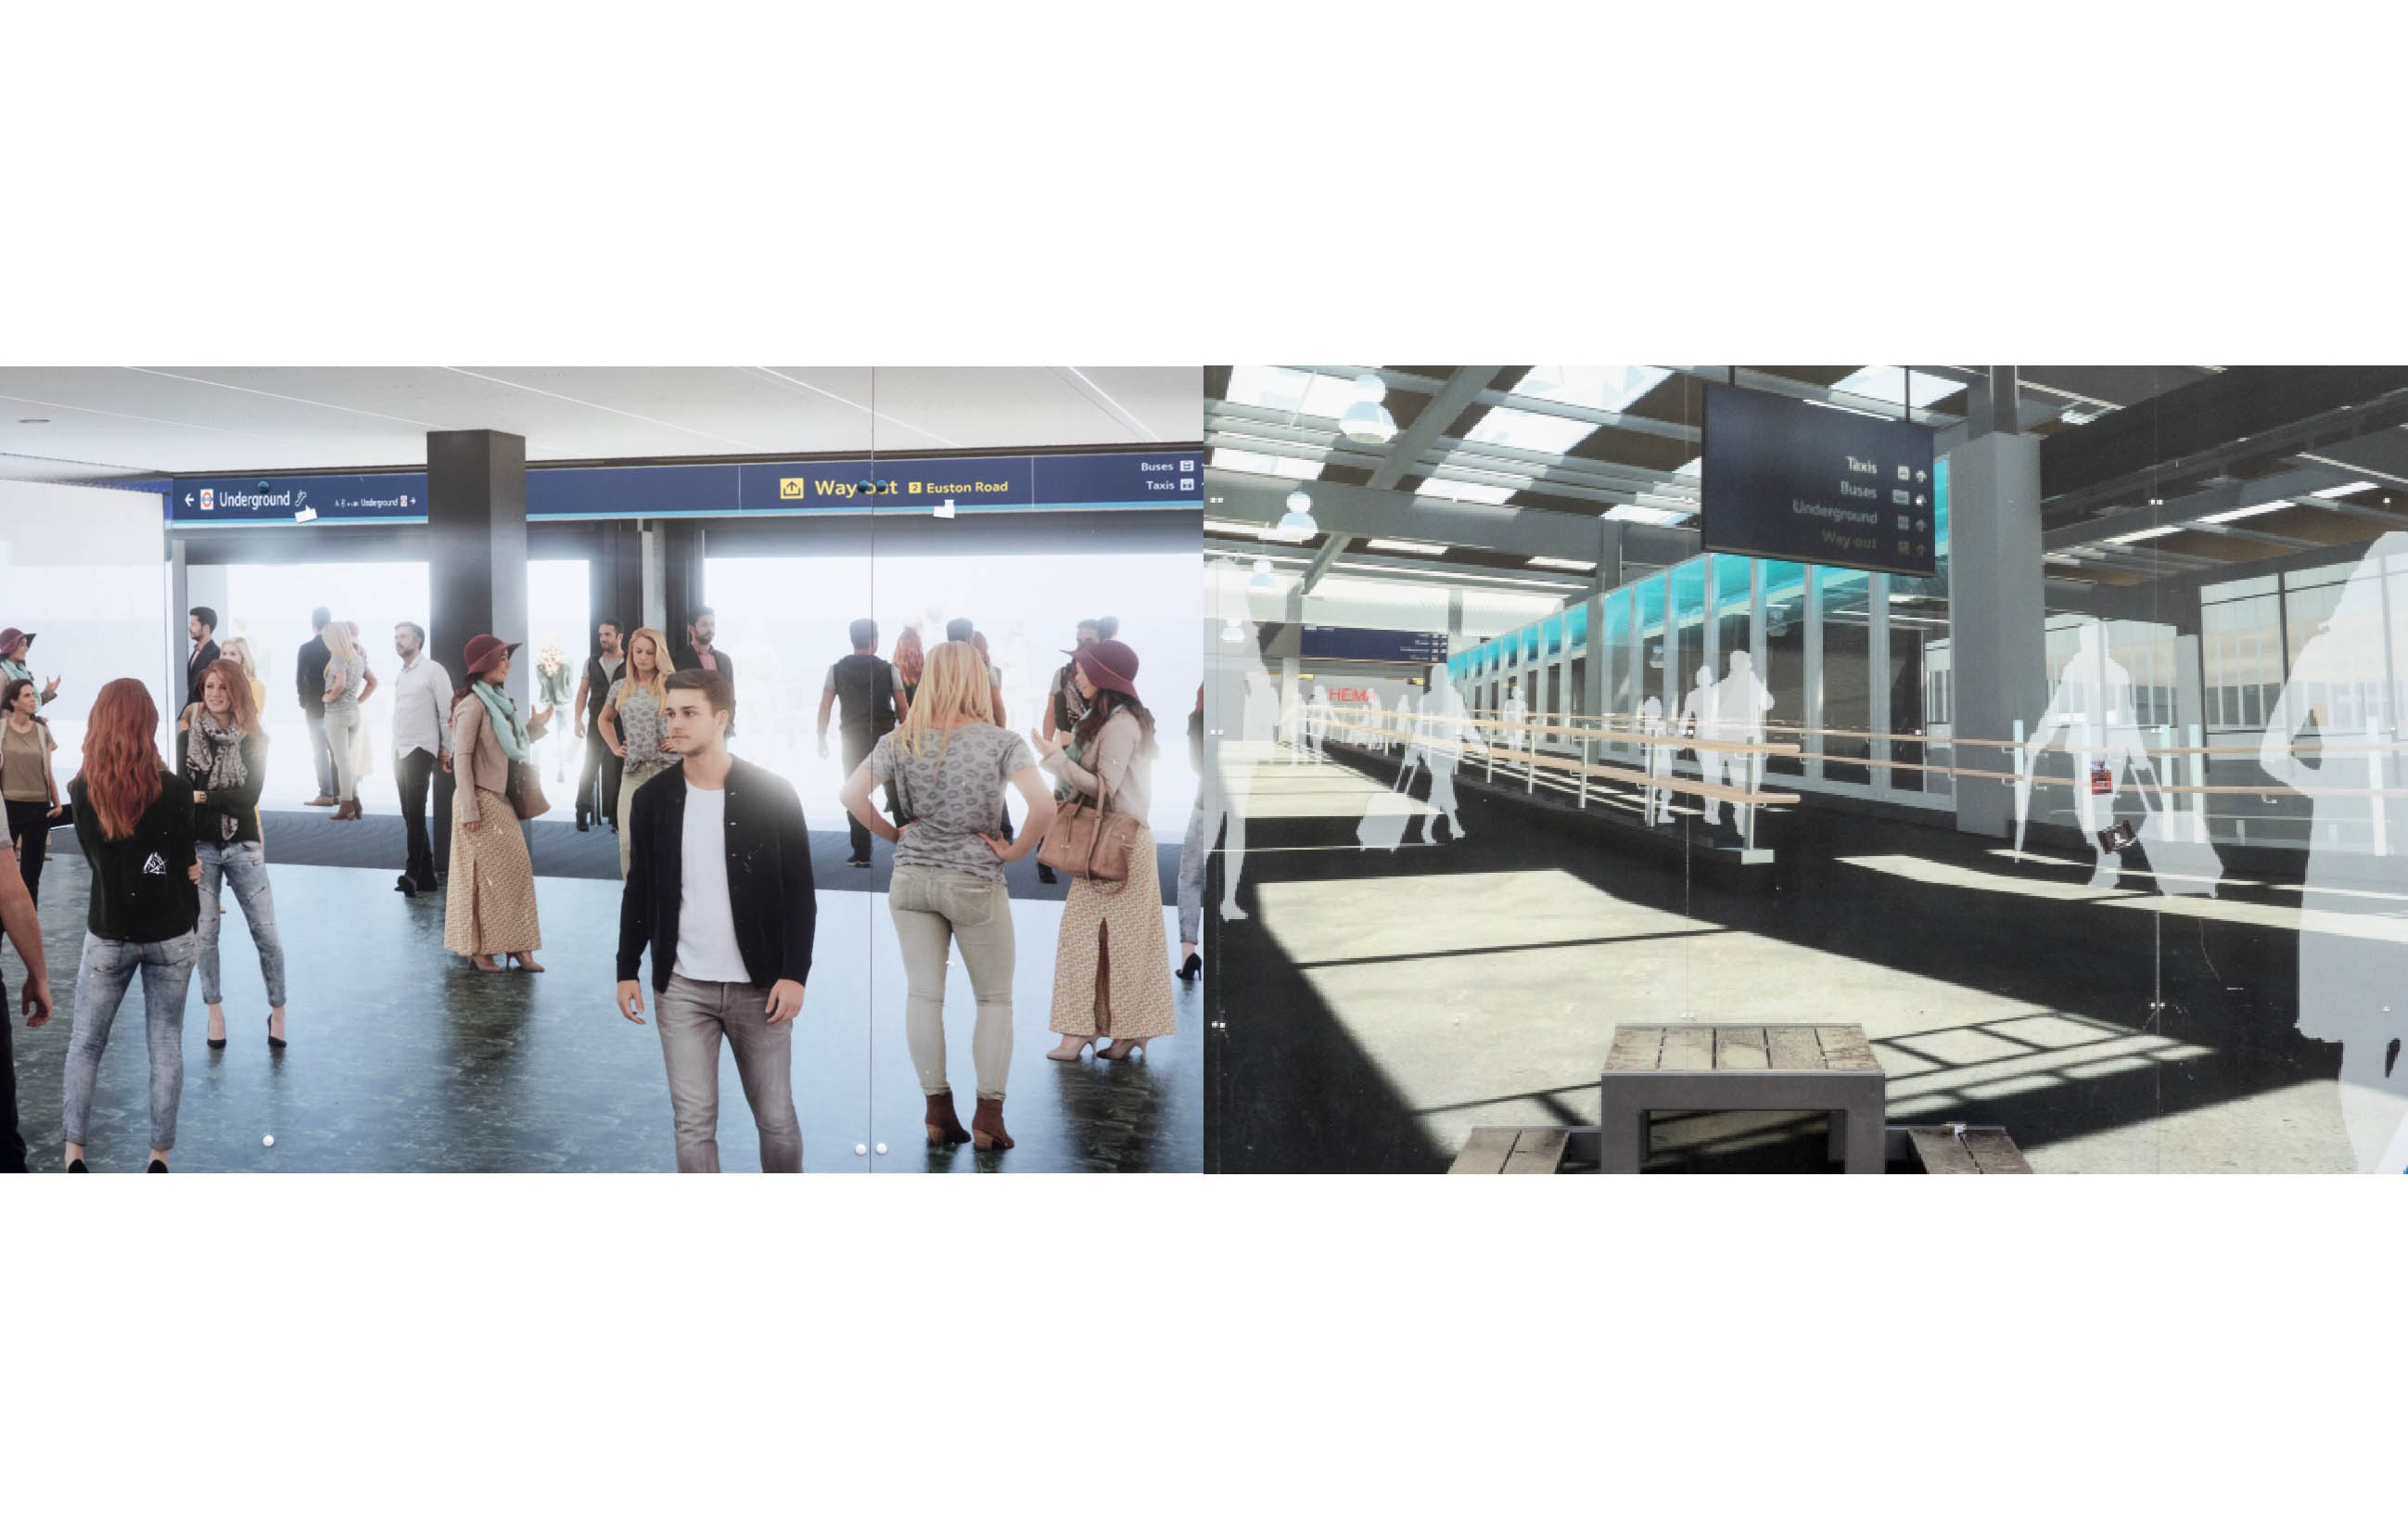 two photos show computer generated visions of a station concourse, one image shows the figures in ghostly, semi-transparent form